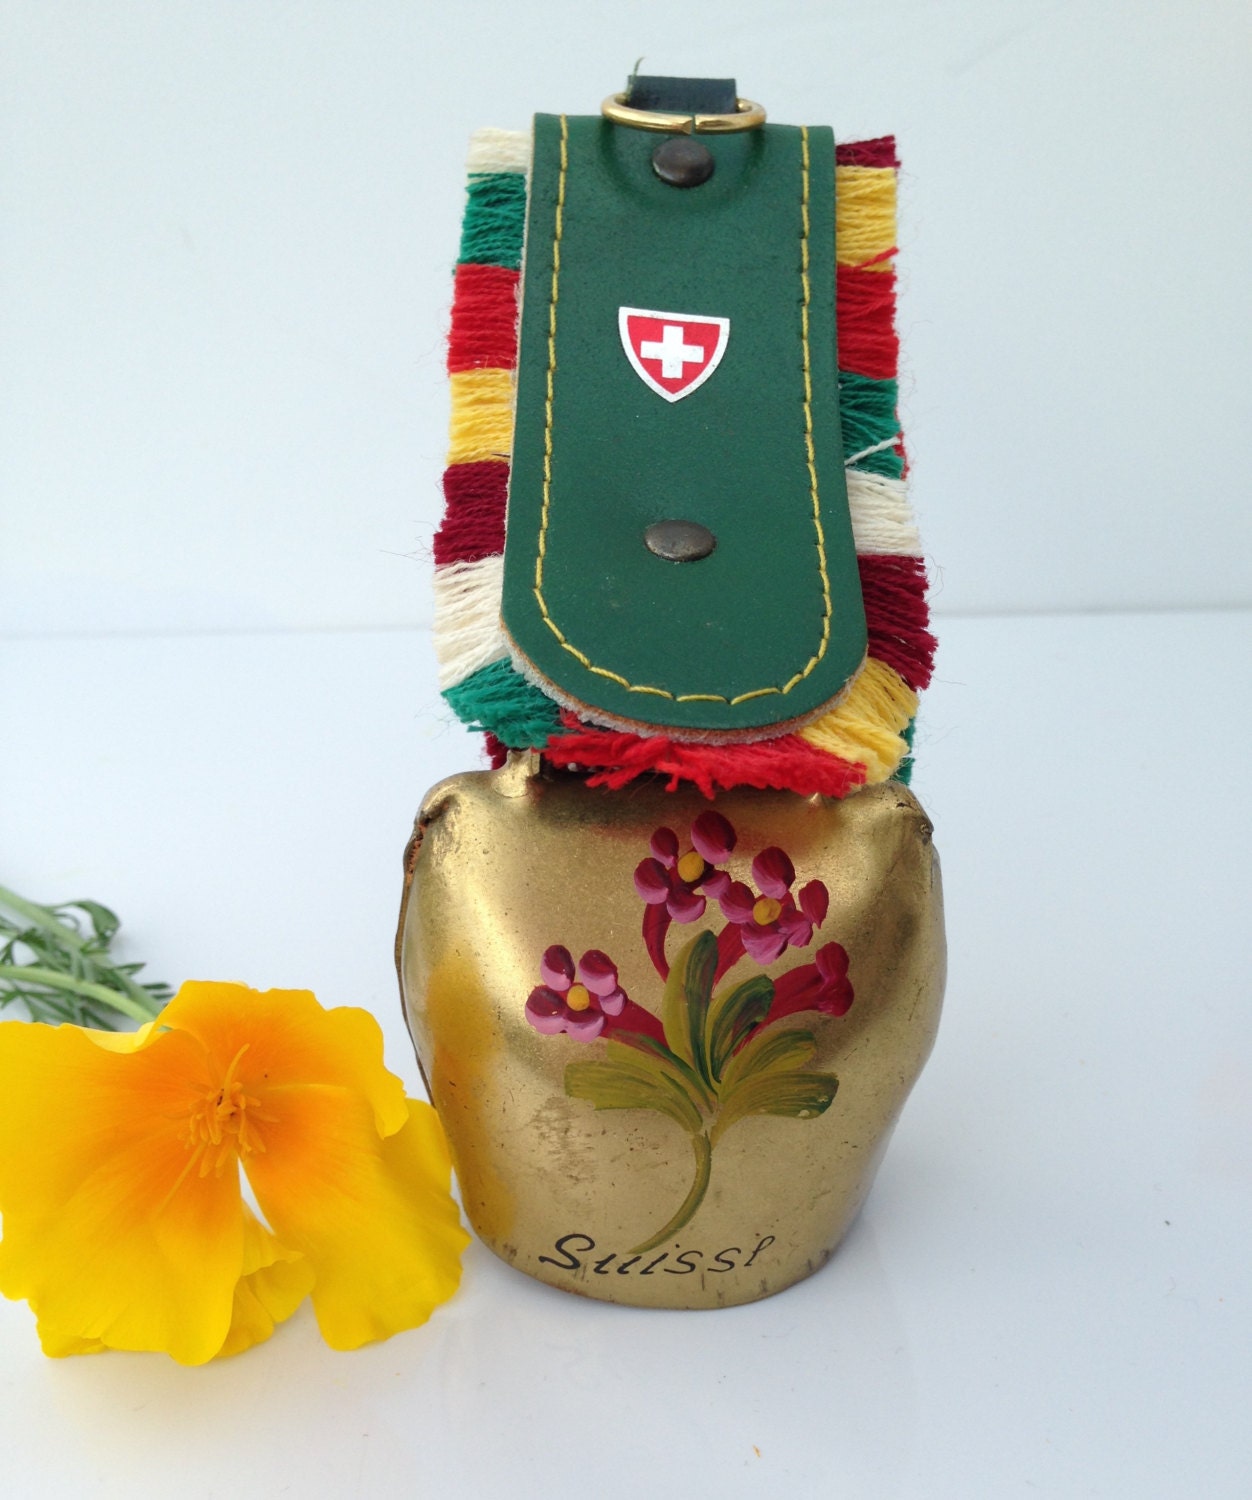 ALPINE COW BELL is a Vintage Swiss Souvenir by VintageofTN on Etsy